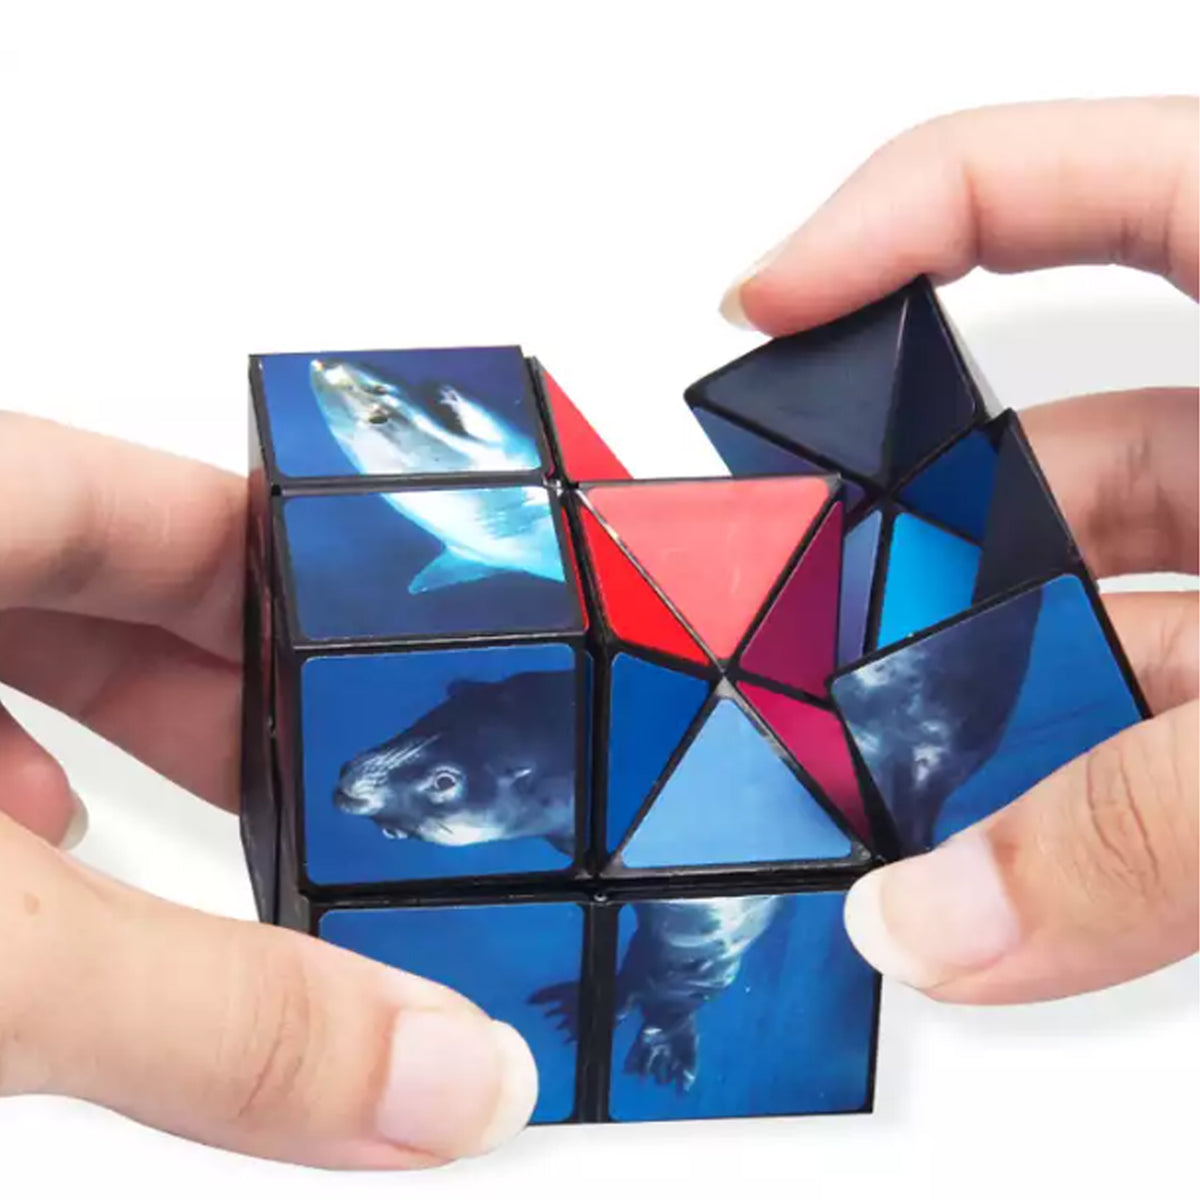 Infinity Cubes Star Puzzle Toy